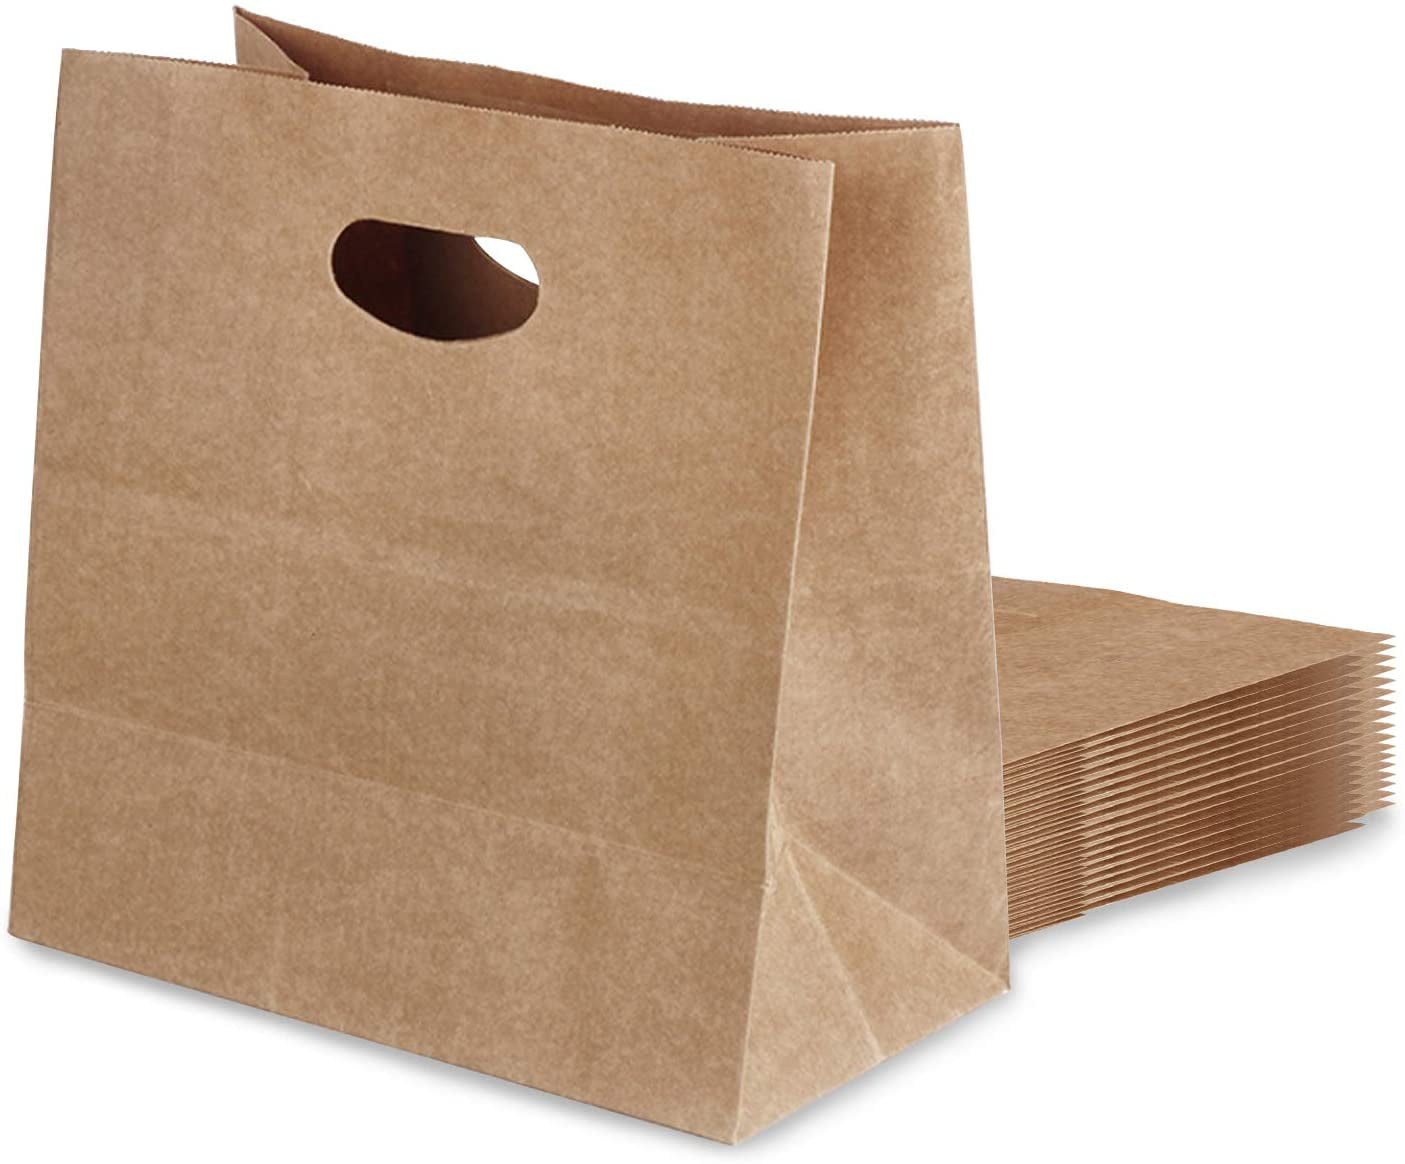 Grocery bags Goody Bags Favor Bags Party Bags Retail Bags Electro 30 Pcs Brown Paper Gift Bags with Handles – 18x8x22cm Brown Kraft Paper Shopping Bags Brown 